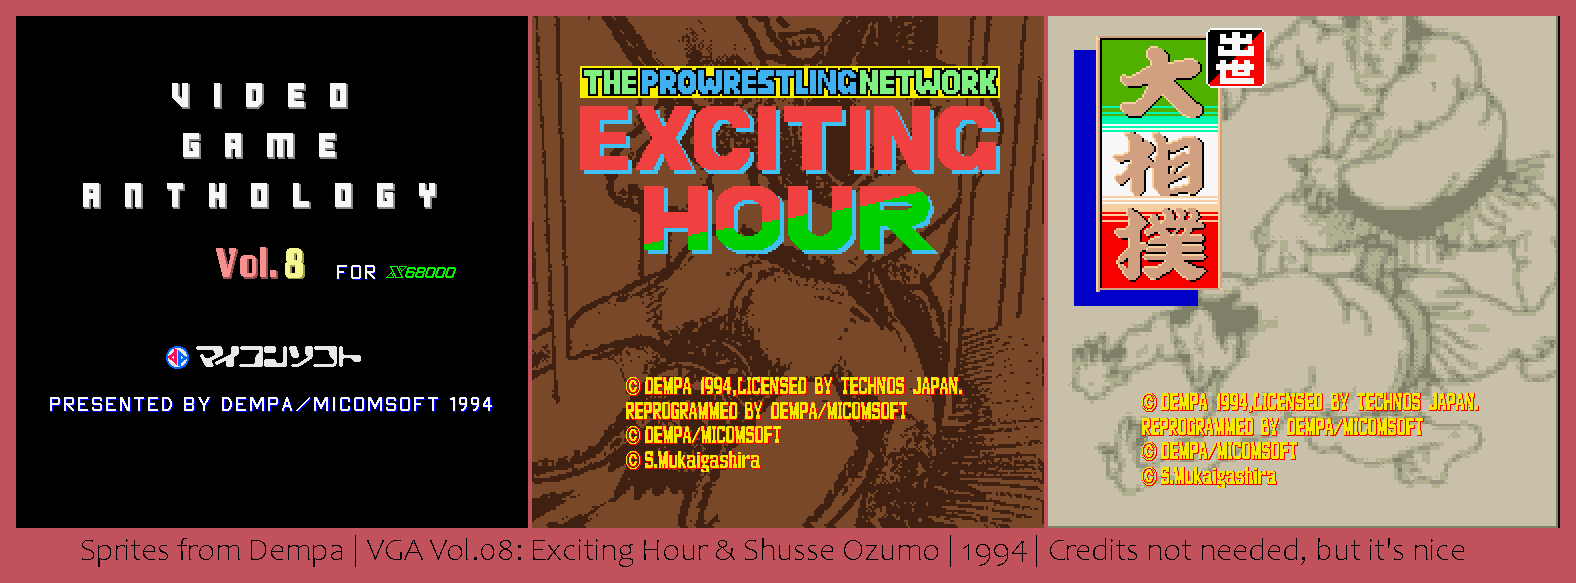 Video Game Anthology Vol.08: Exciting Hour & Shusse Ozumo - Loading Screens